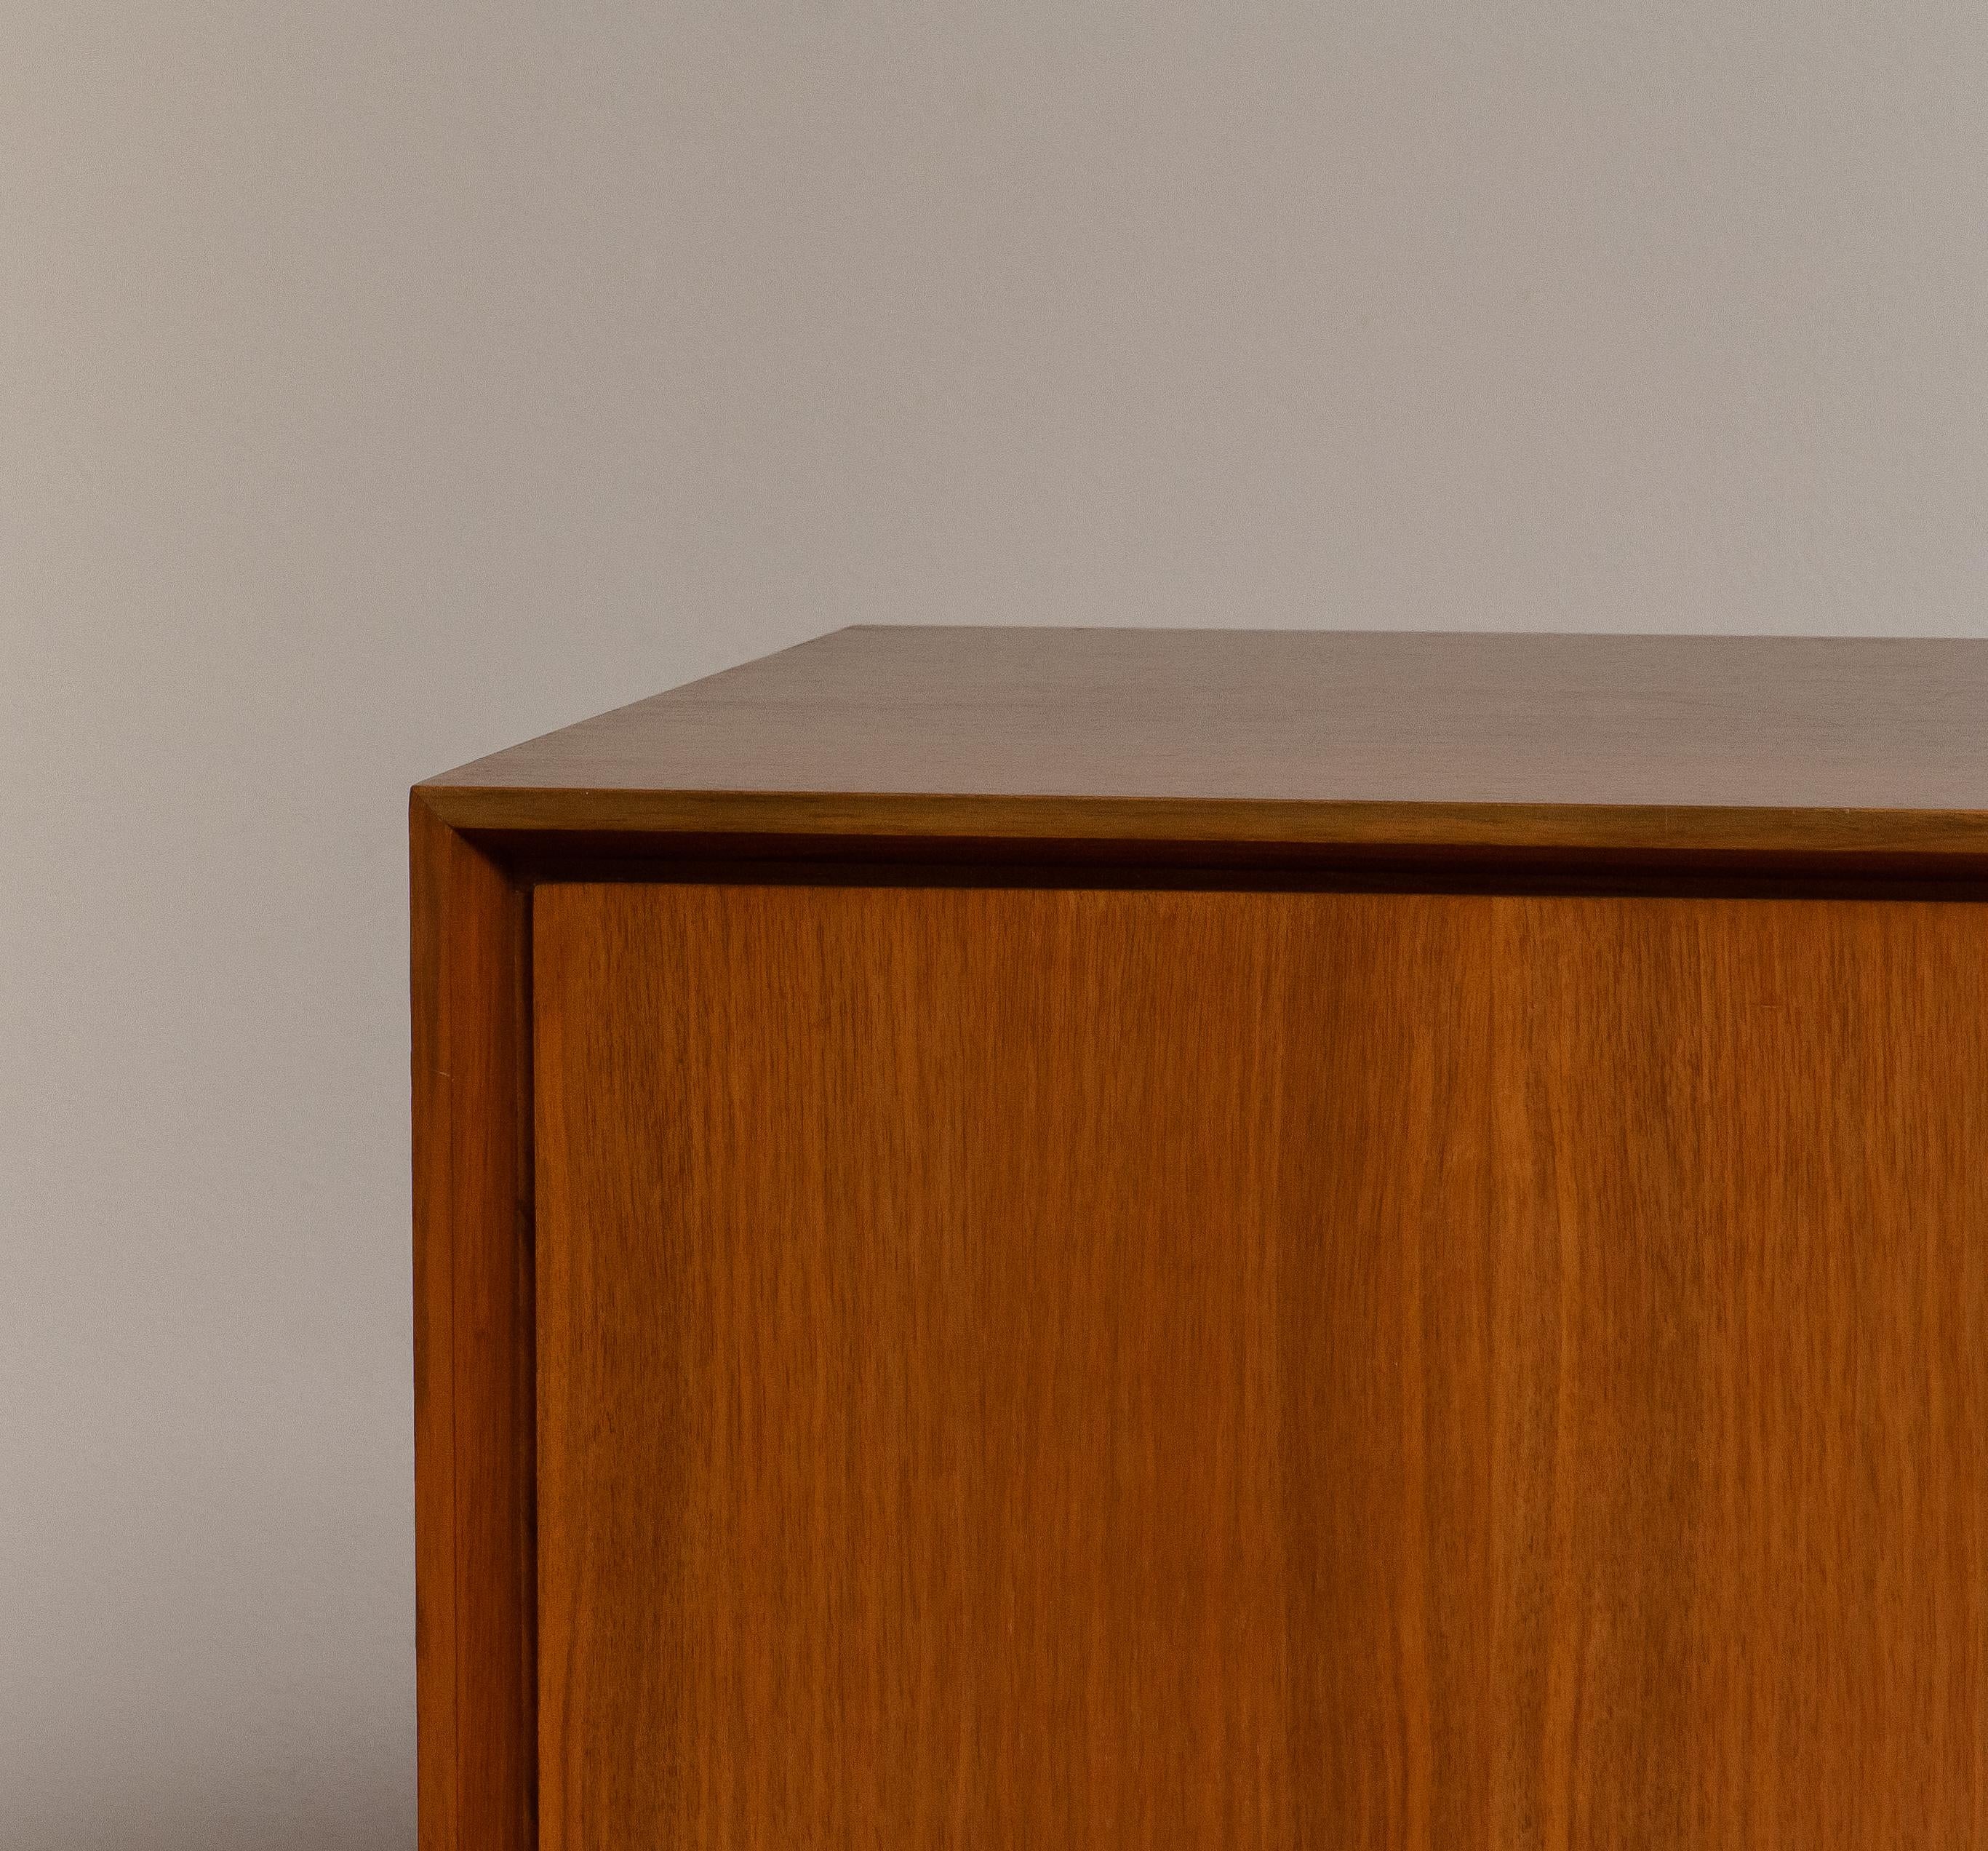 Danish 1970, Wide Credenzas Sideboard in Walnut with Chrome Handles and Legs